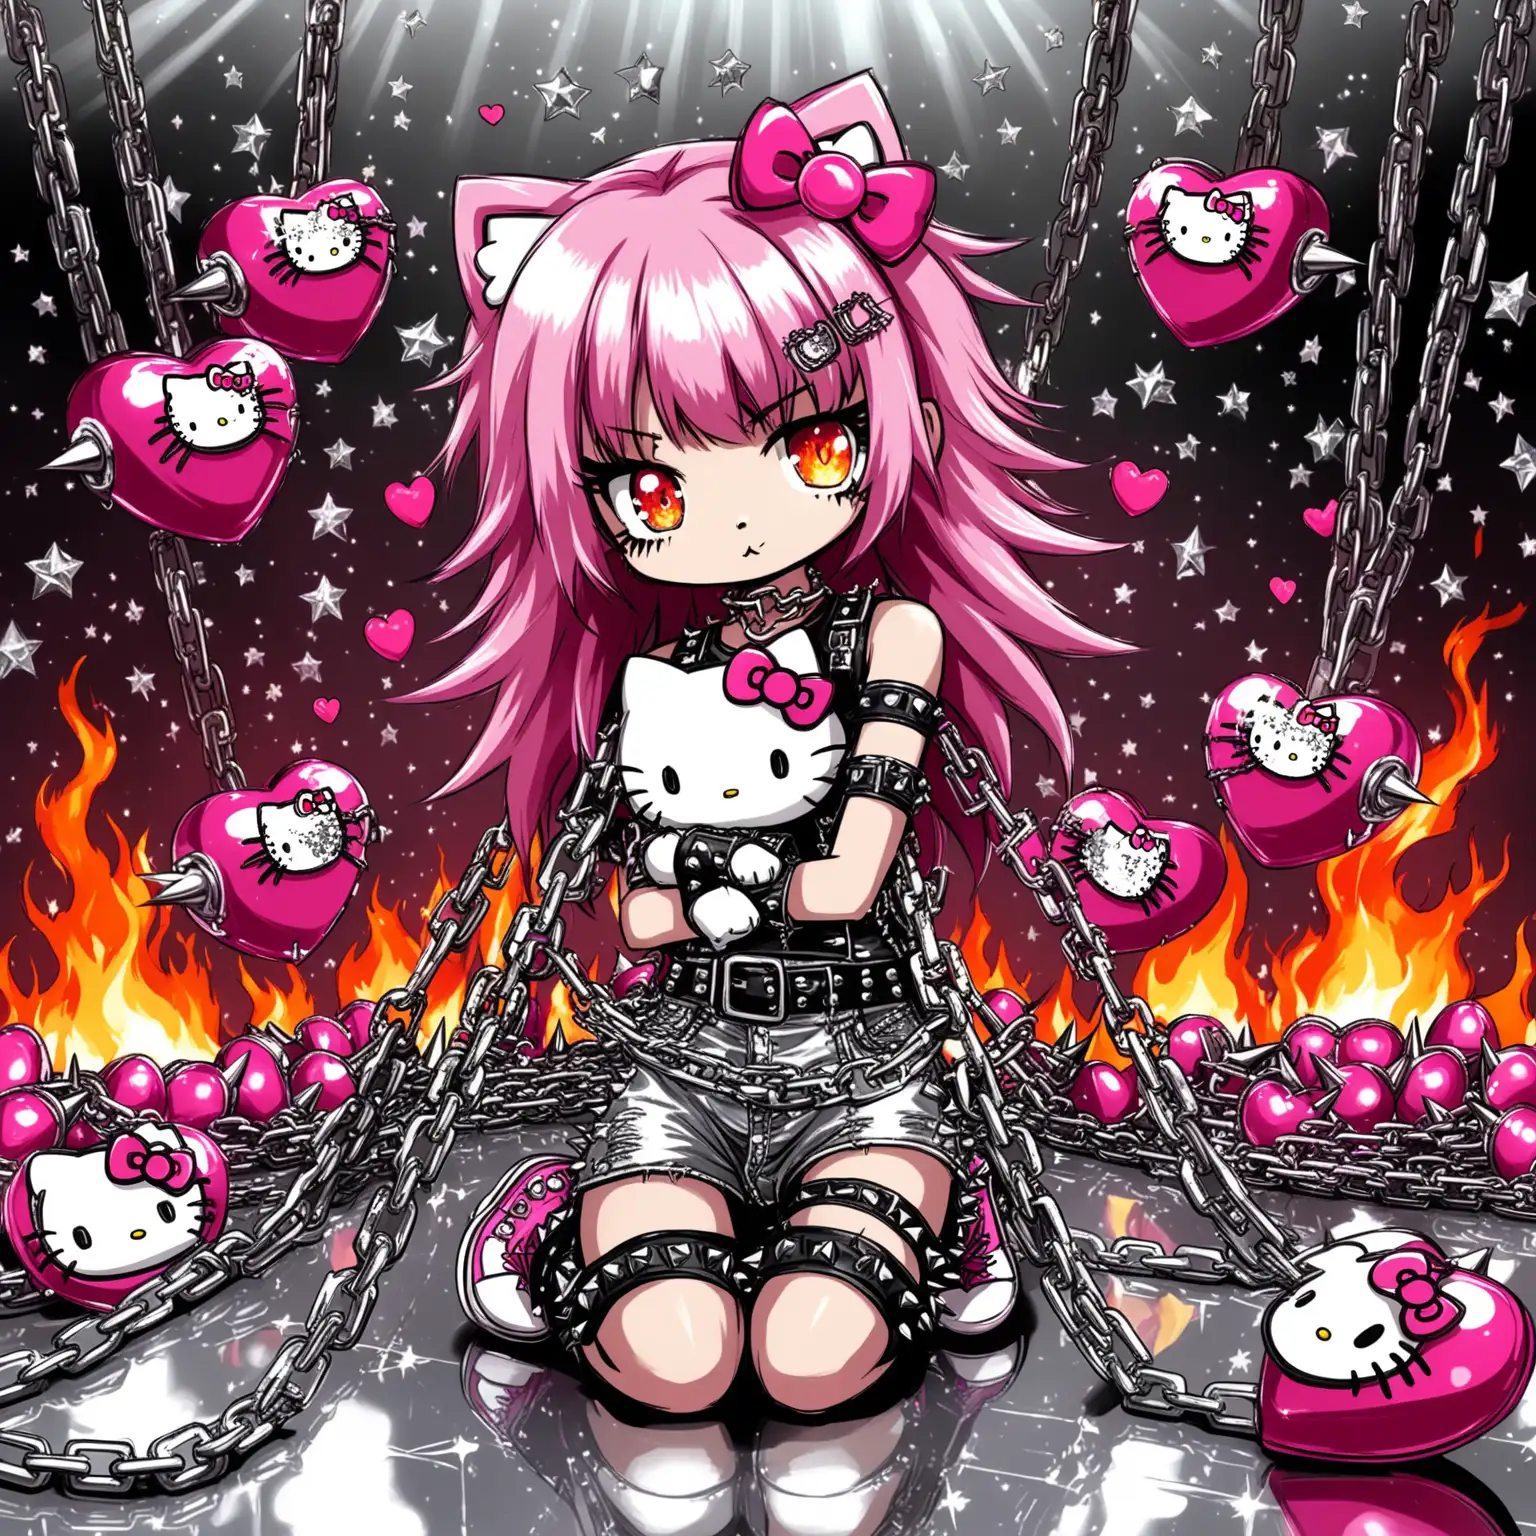 Flirtatious Pink Hello Kitty with Chains and Spikes on Reflective Silver Floor